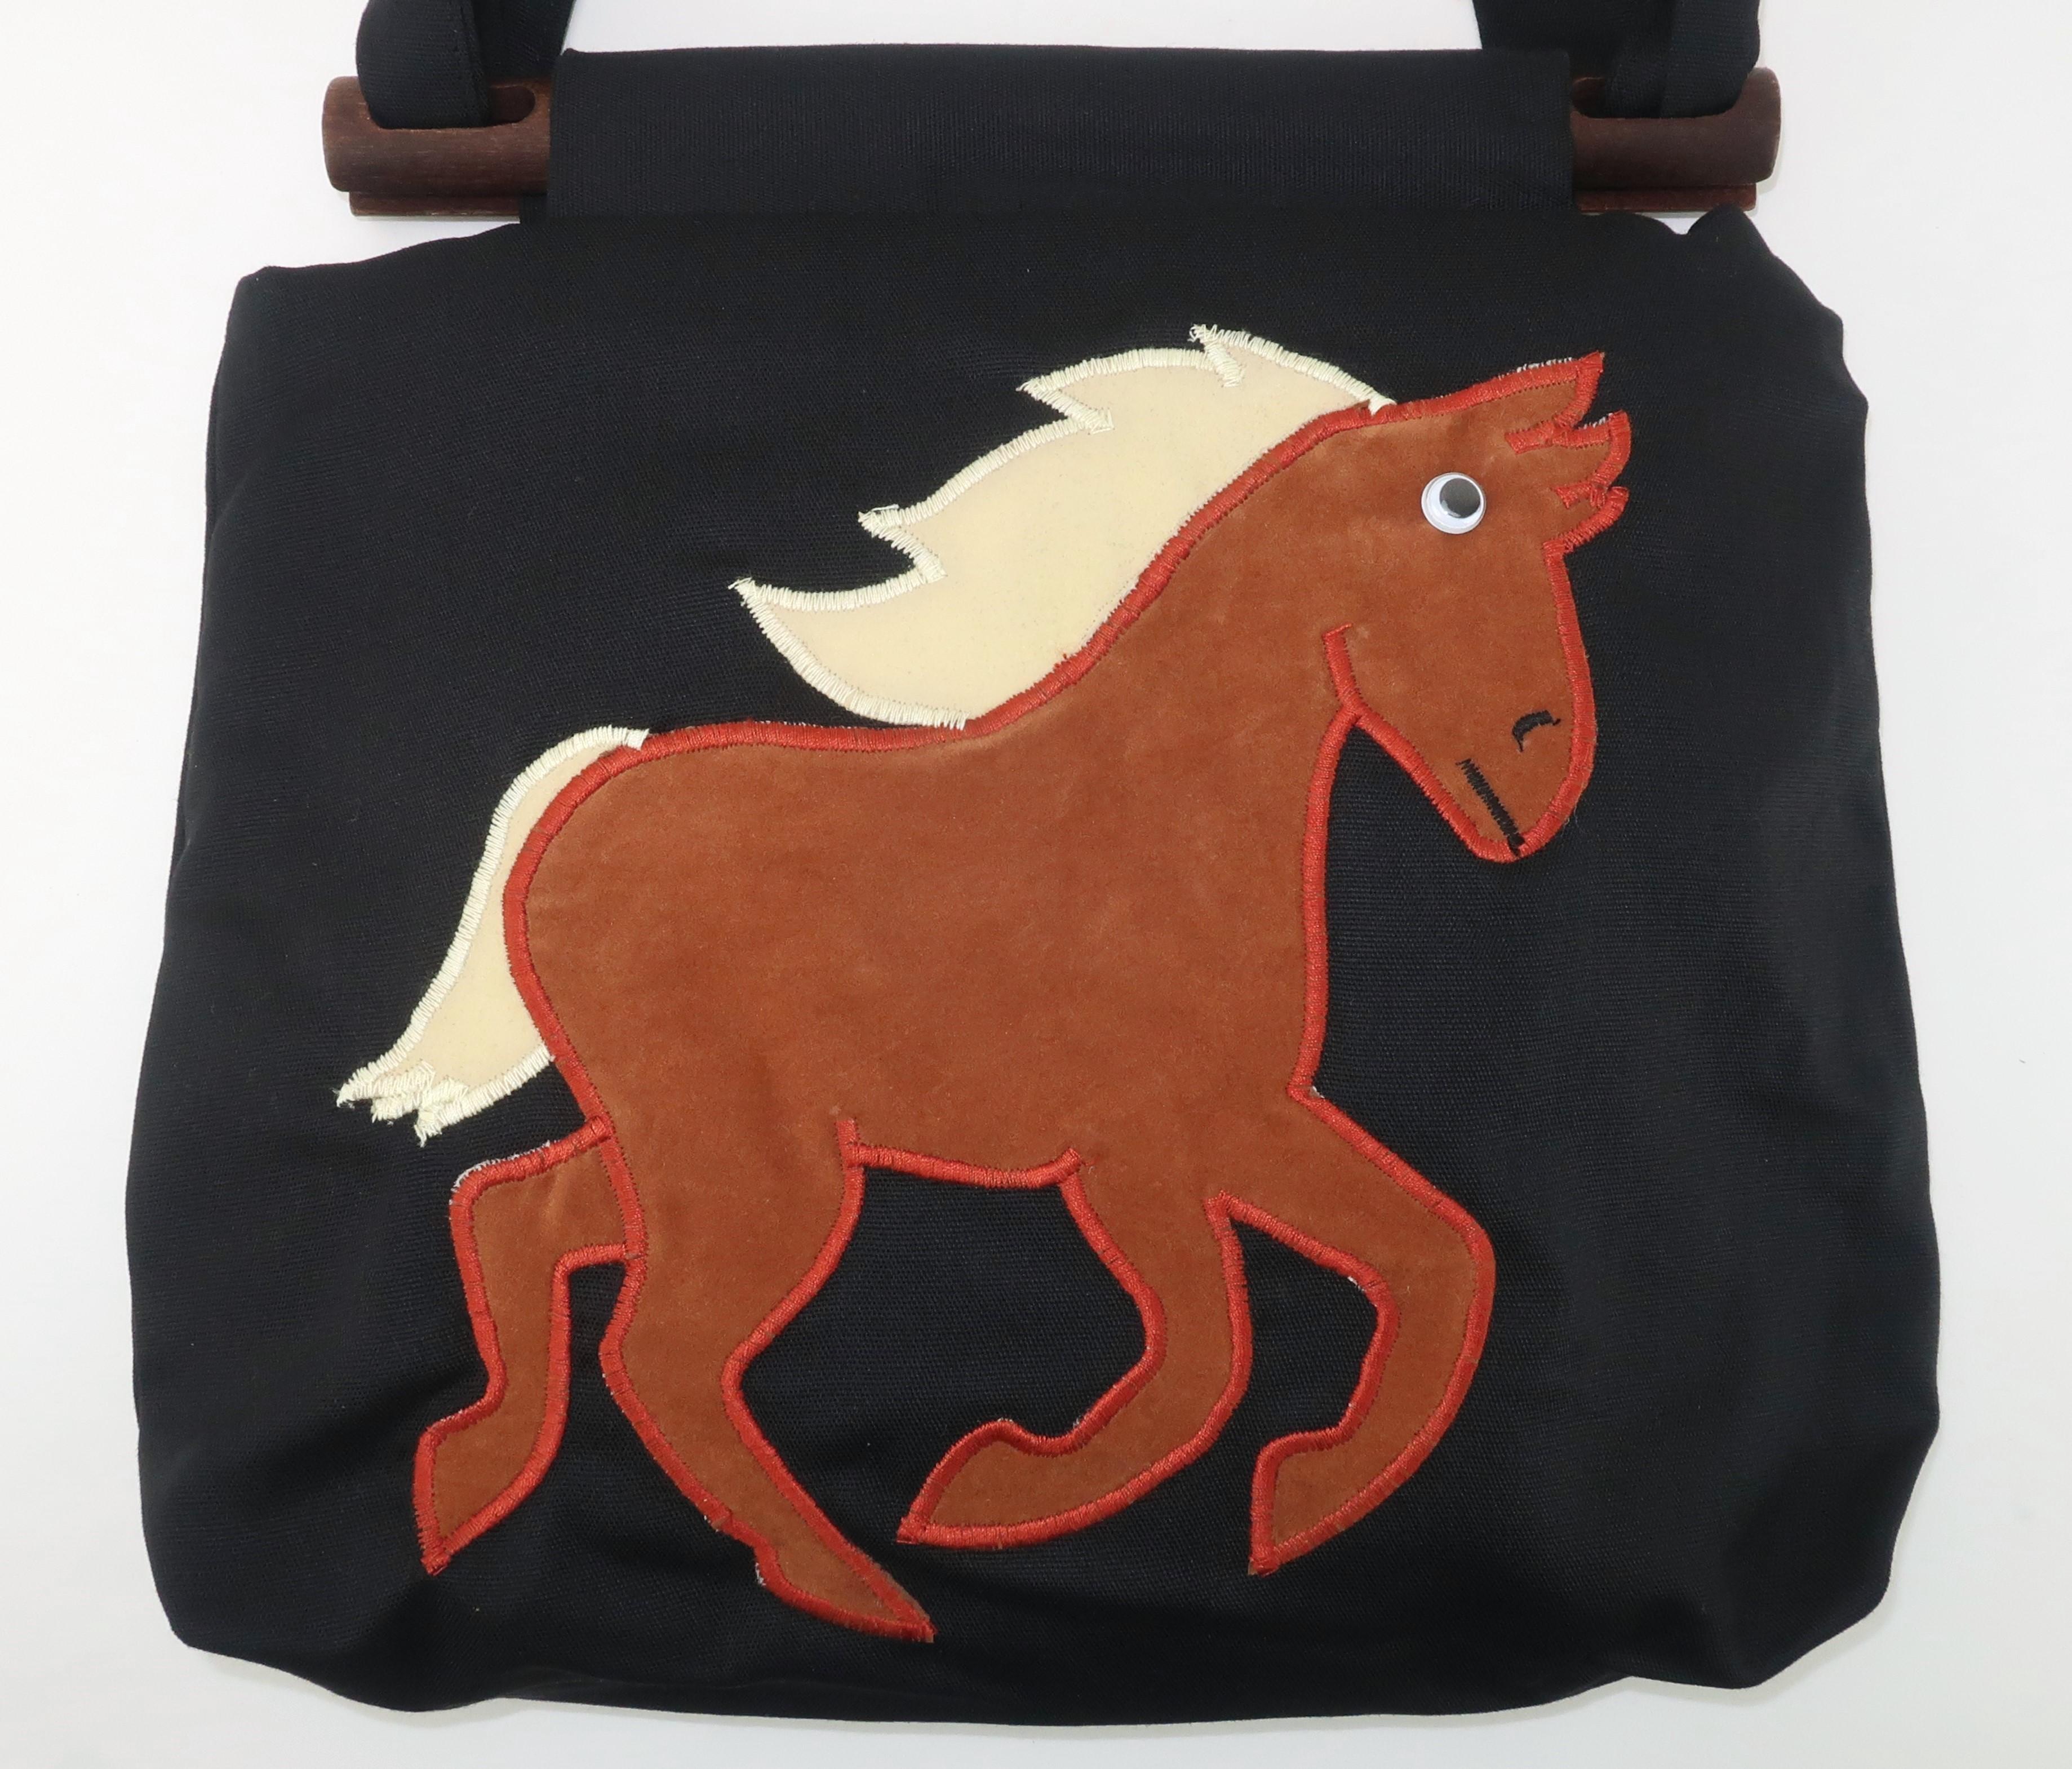 Wonderfully whimsical tote style handbag accented by a horse applique complete with 'googly' eye silliness.  The bag is constructed in a black canvas lined with a quilted black and white floral cotton.  The horse applique is a brown and creme ultra